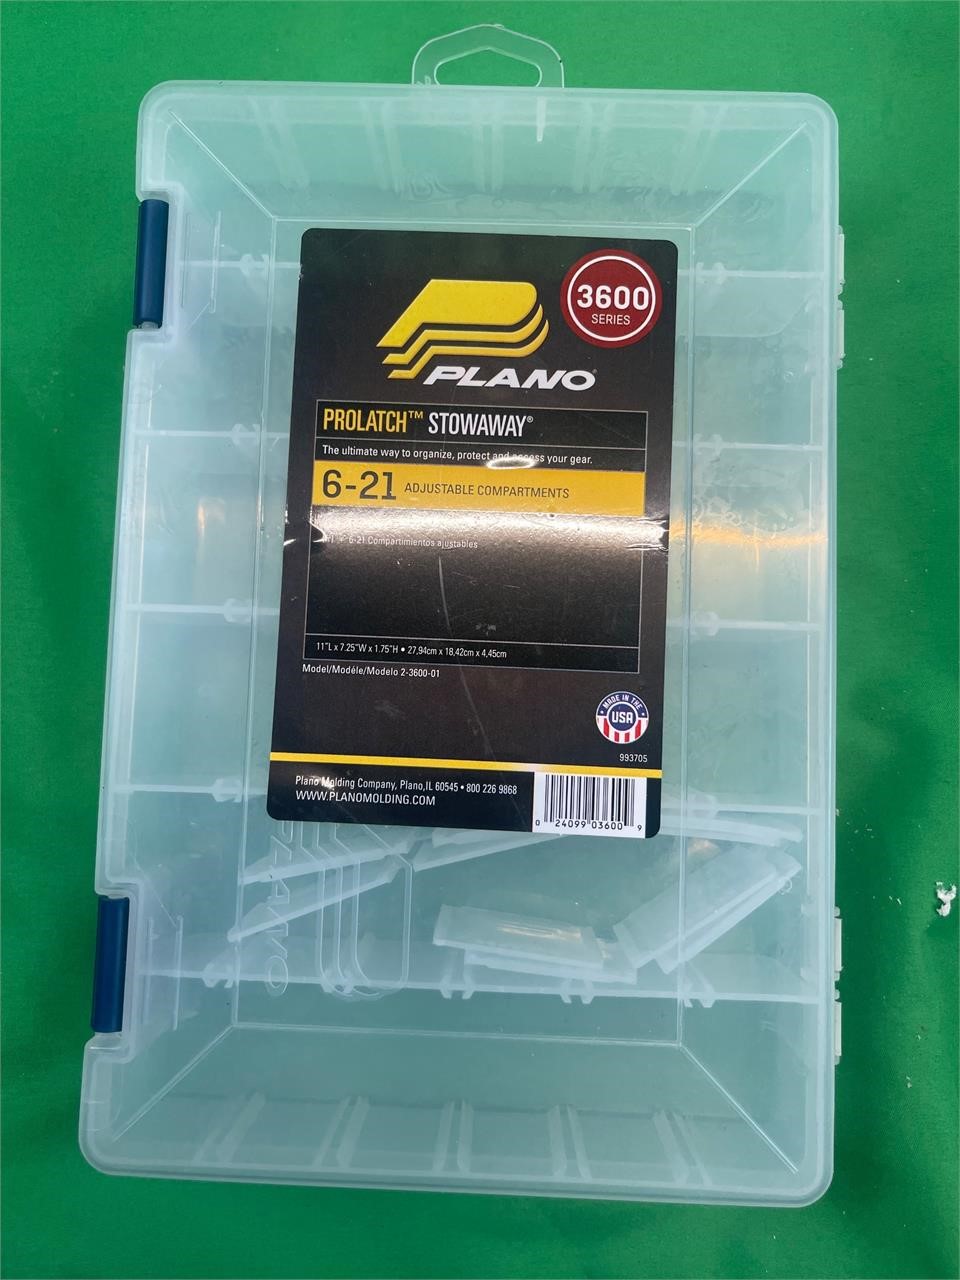 Plano tackle storage container